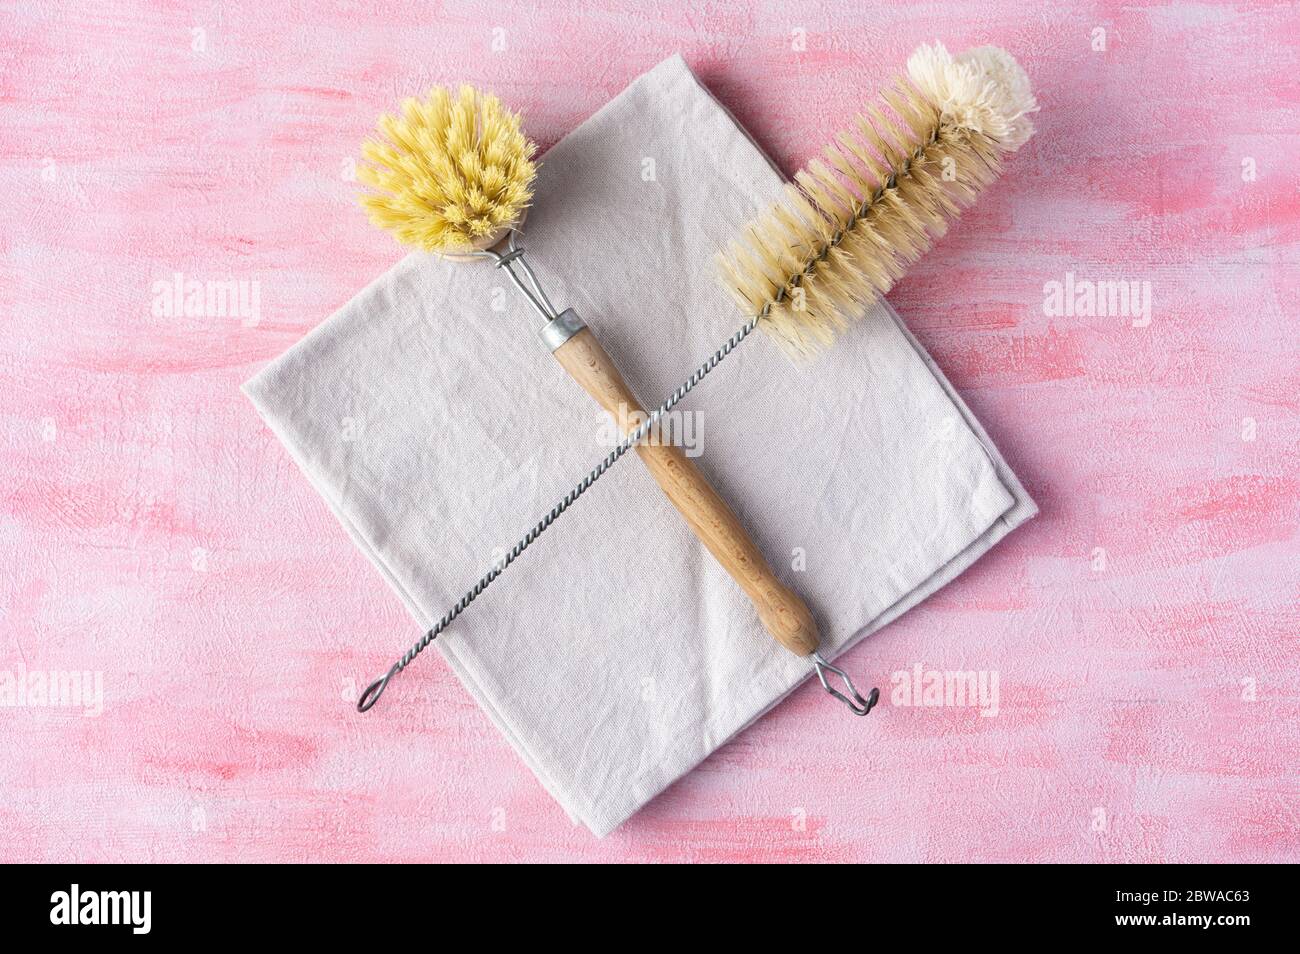 Bottle and dish brush on gray cloth isolated on pink background. Zero waste and natural ingredients home cleaning concept. Top view, layout. Stock Photo